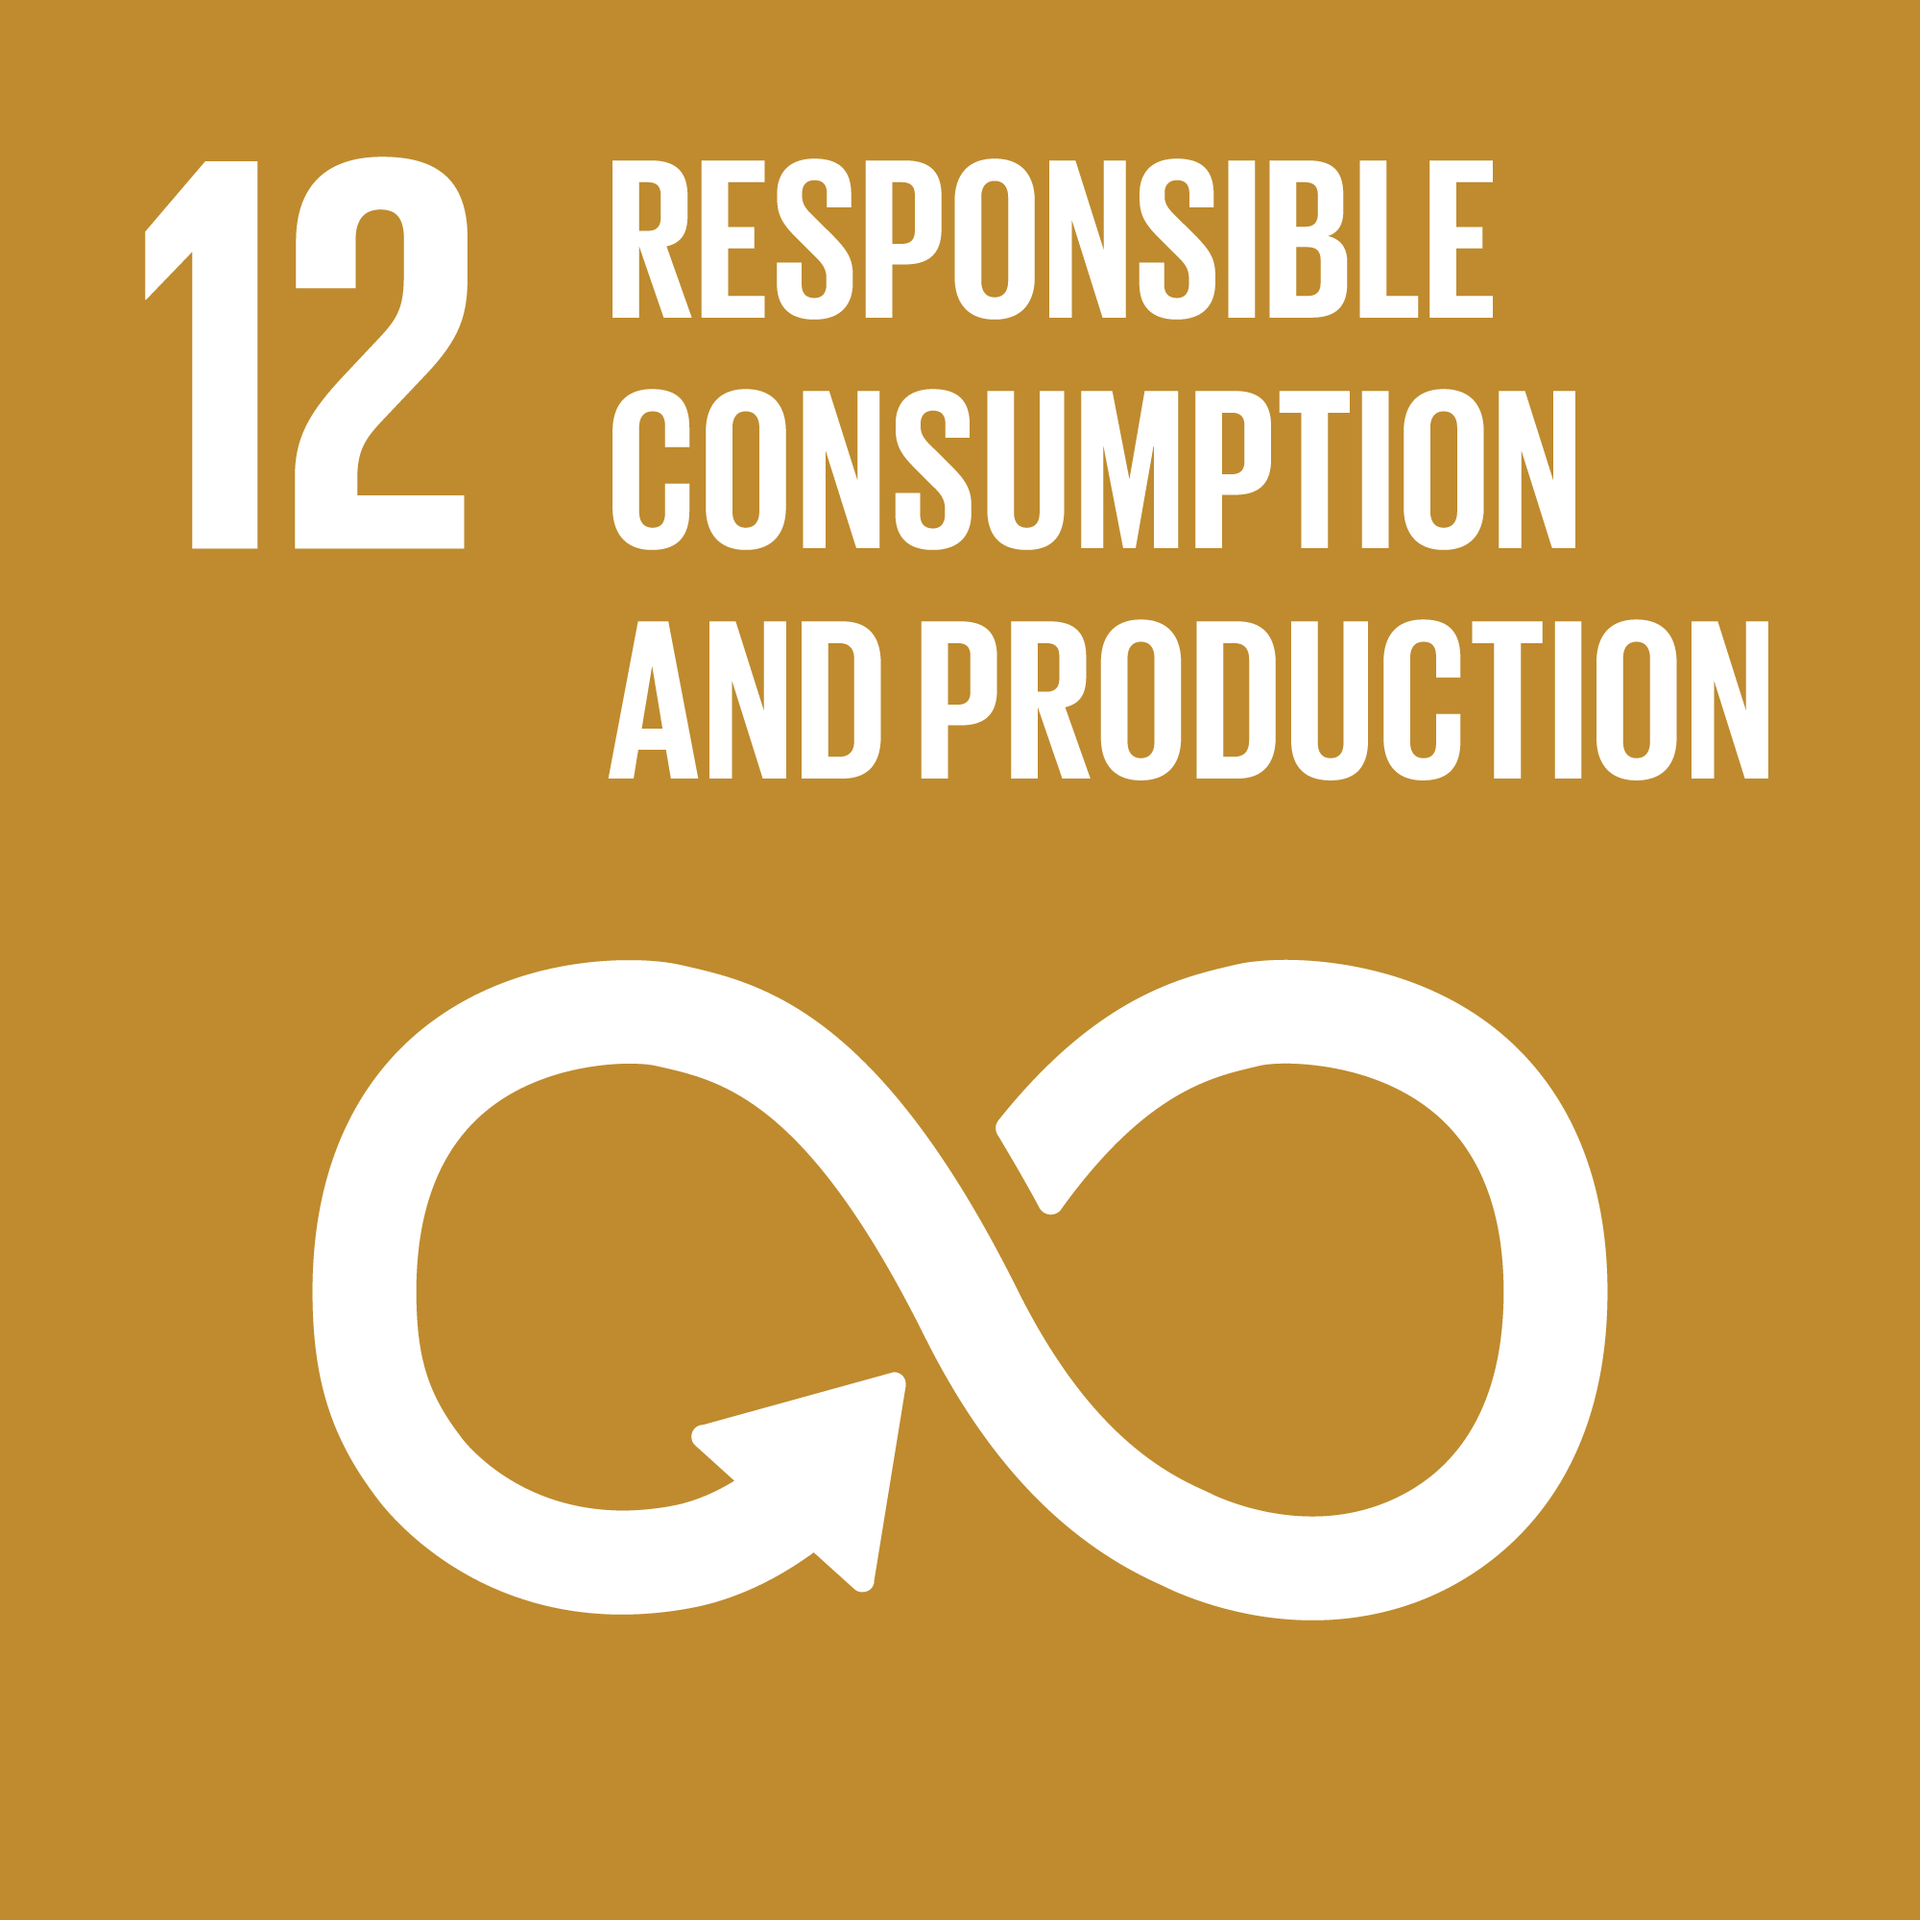 A white infinity symbol with the words `` responsible consumption and production '' on a brown background.